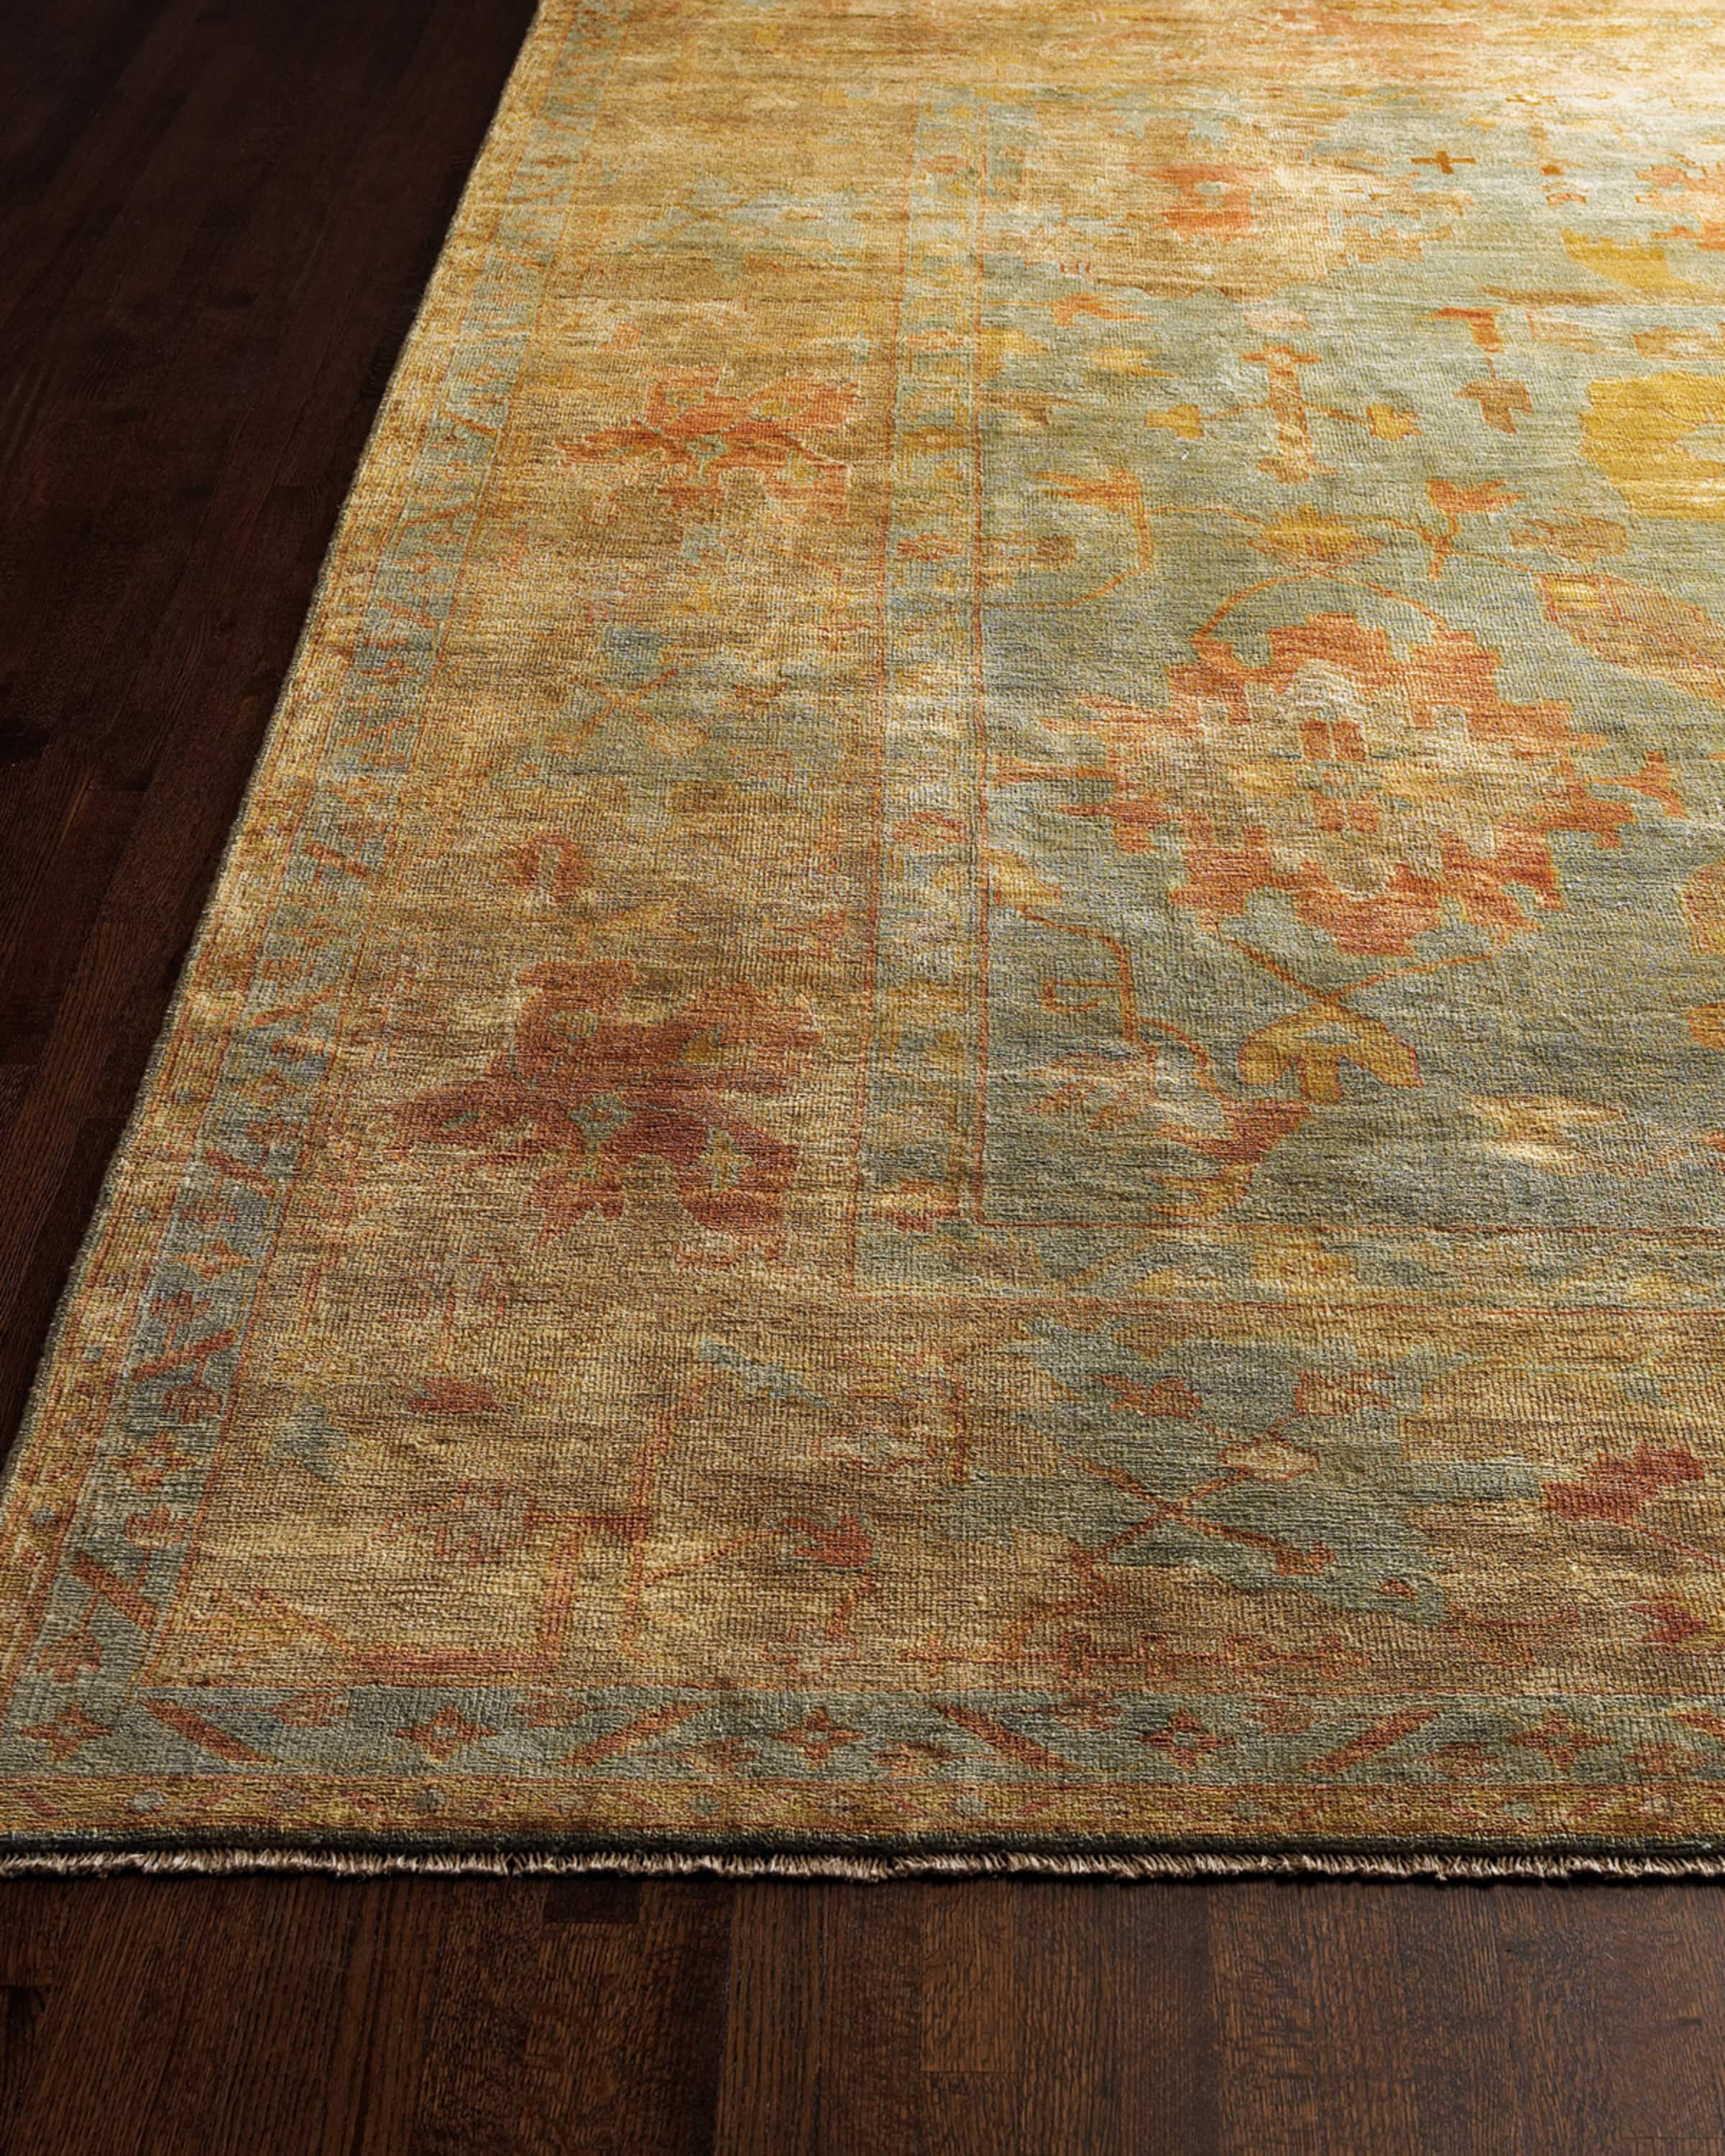 Exquisite Rugs Victorian Oushak Rug, 8' x 10'